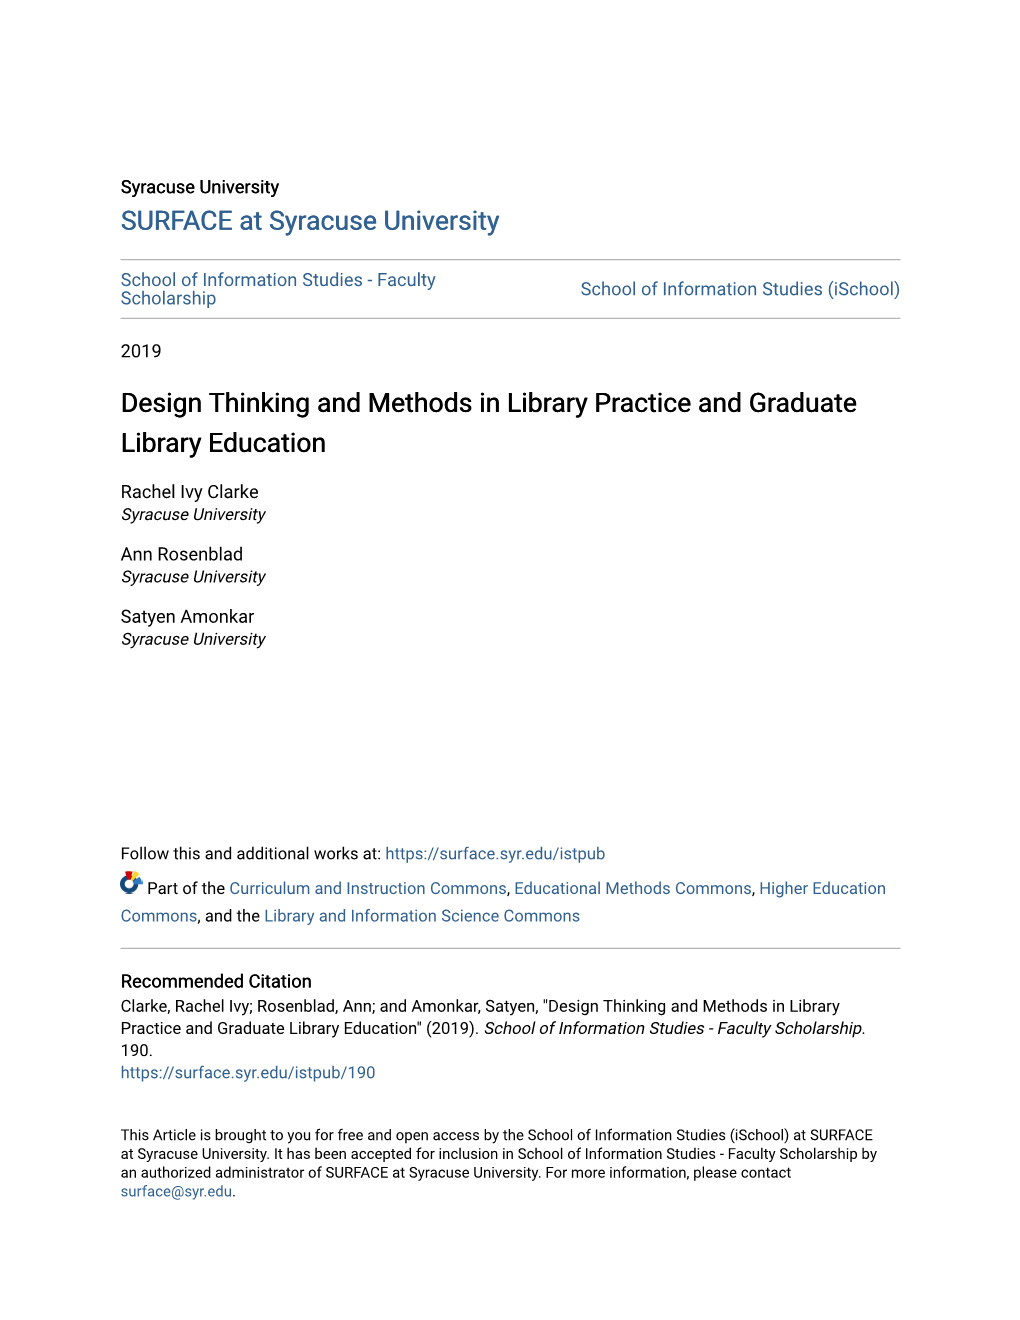 Design Thinking and Methods in Library Practice and Graduate Library Education